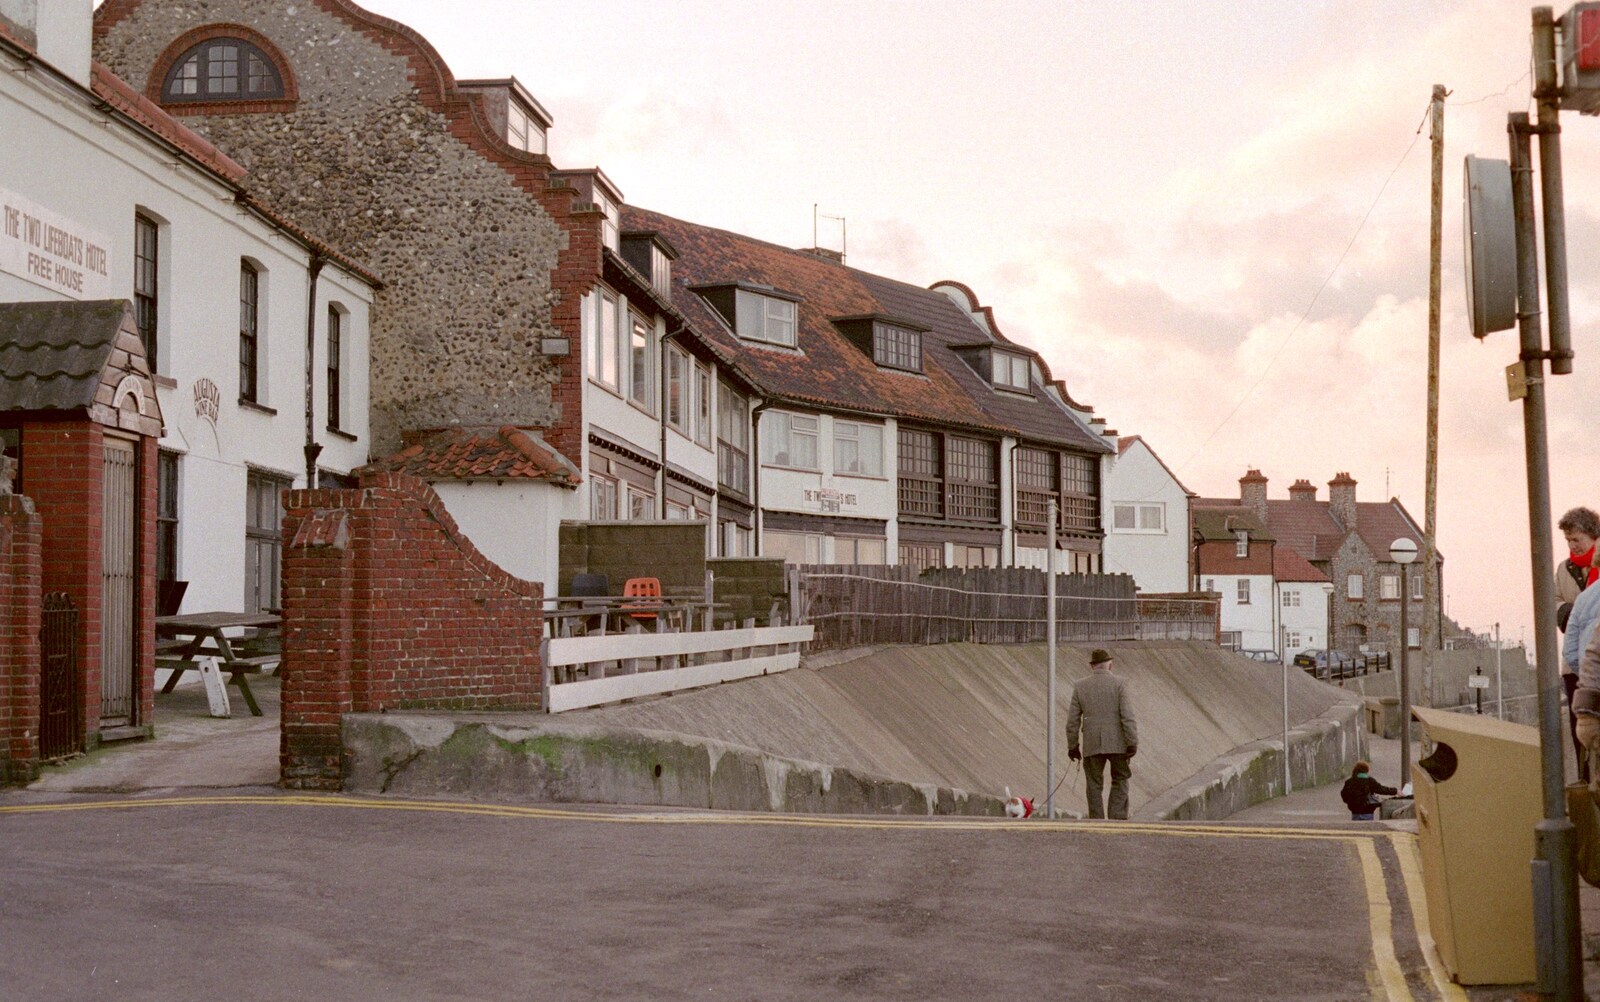 The seafront, and the Two Lifeboats Hotel from A Visit to Sheringham, North Norfolk - 20th November 1987